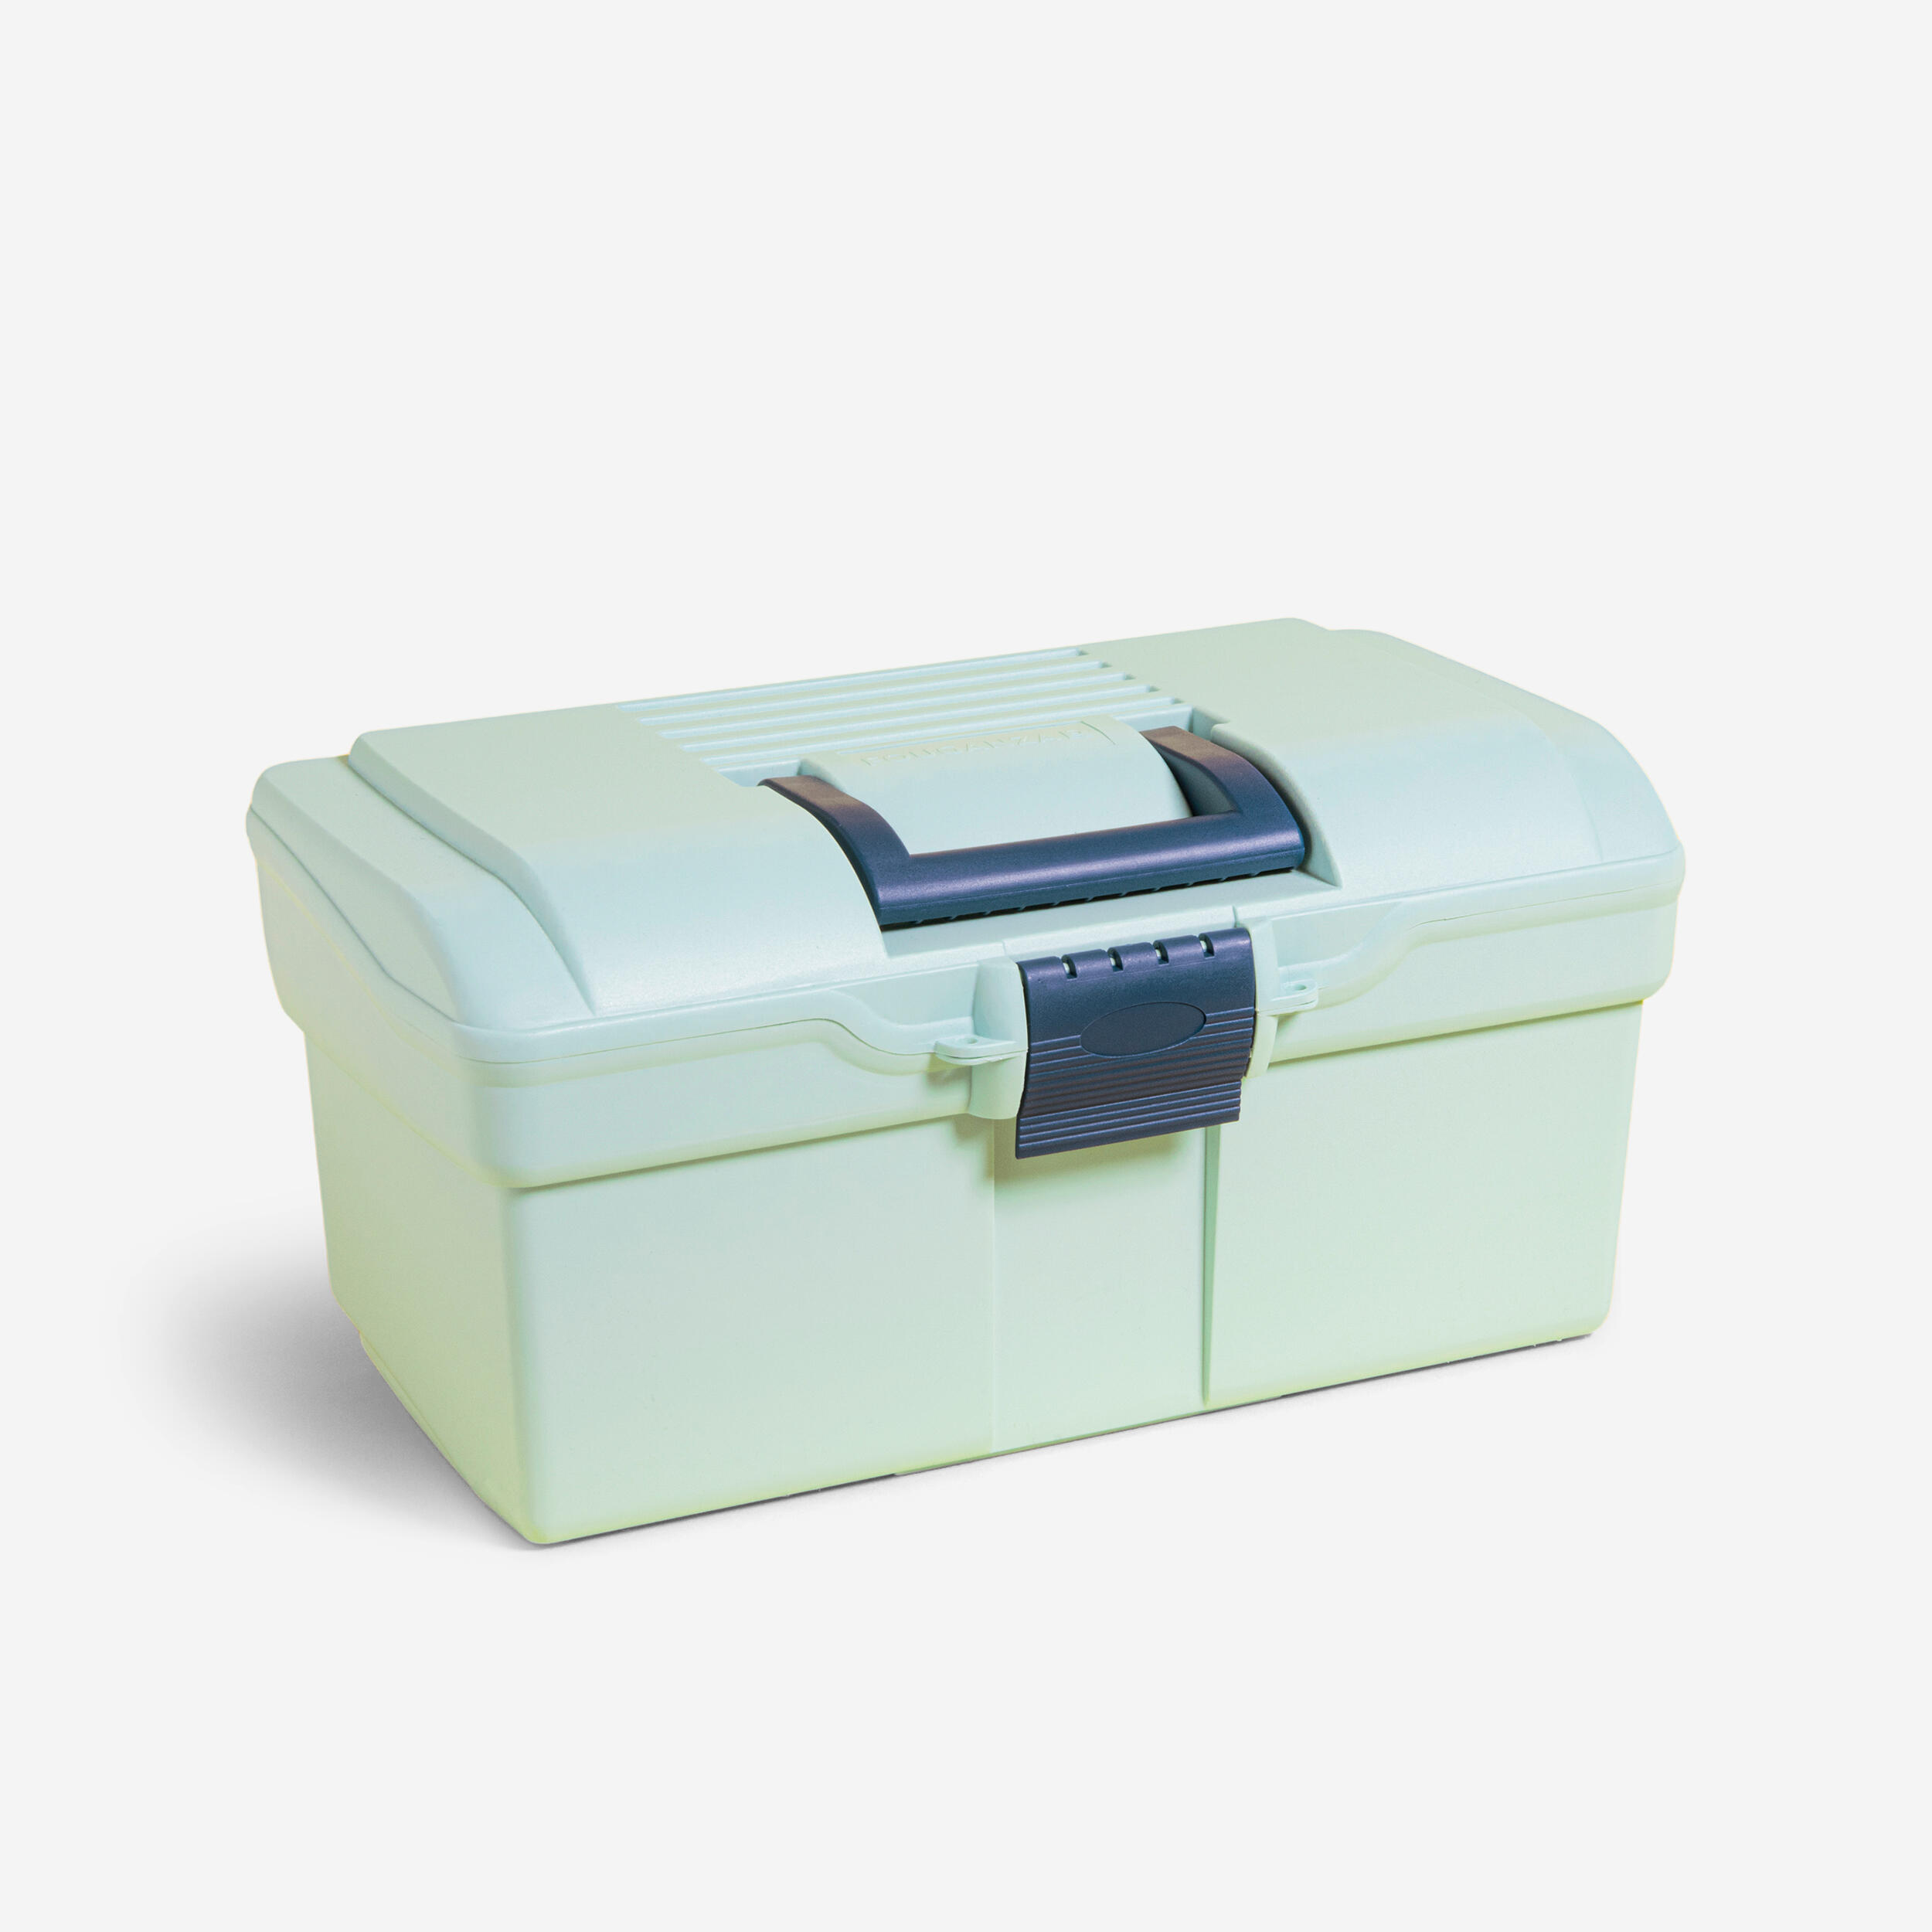 Horse Riding Grooming Box 300 - Green/Blue 1/3